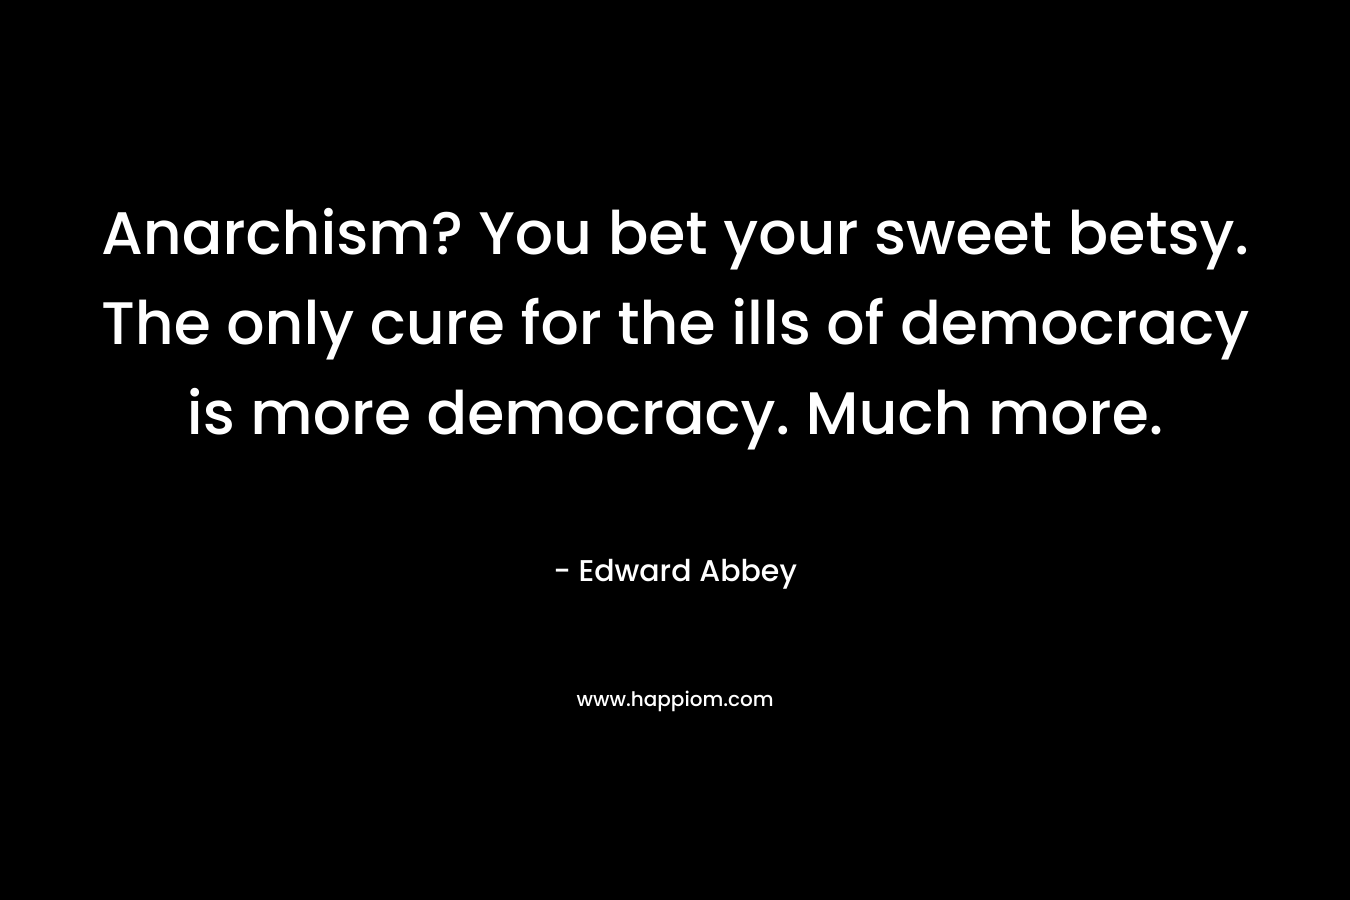 Anarchism? You bet your sweet betsy. The only cure for the ills of democracy is more democracy. Much more. – Edward Abbey